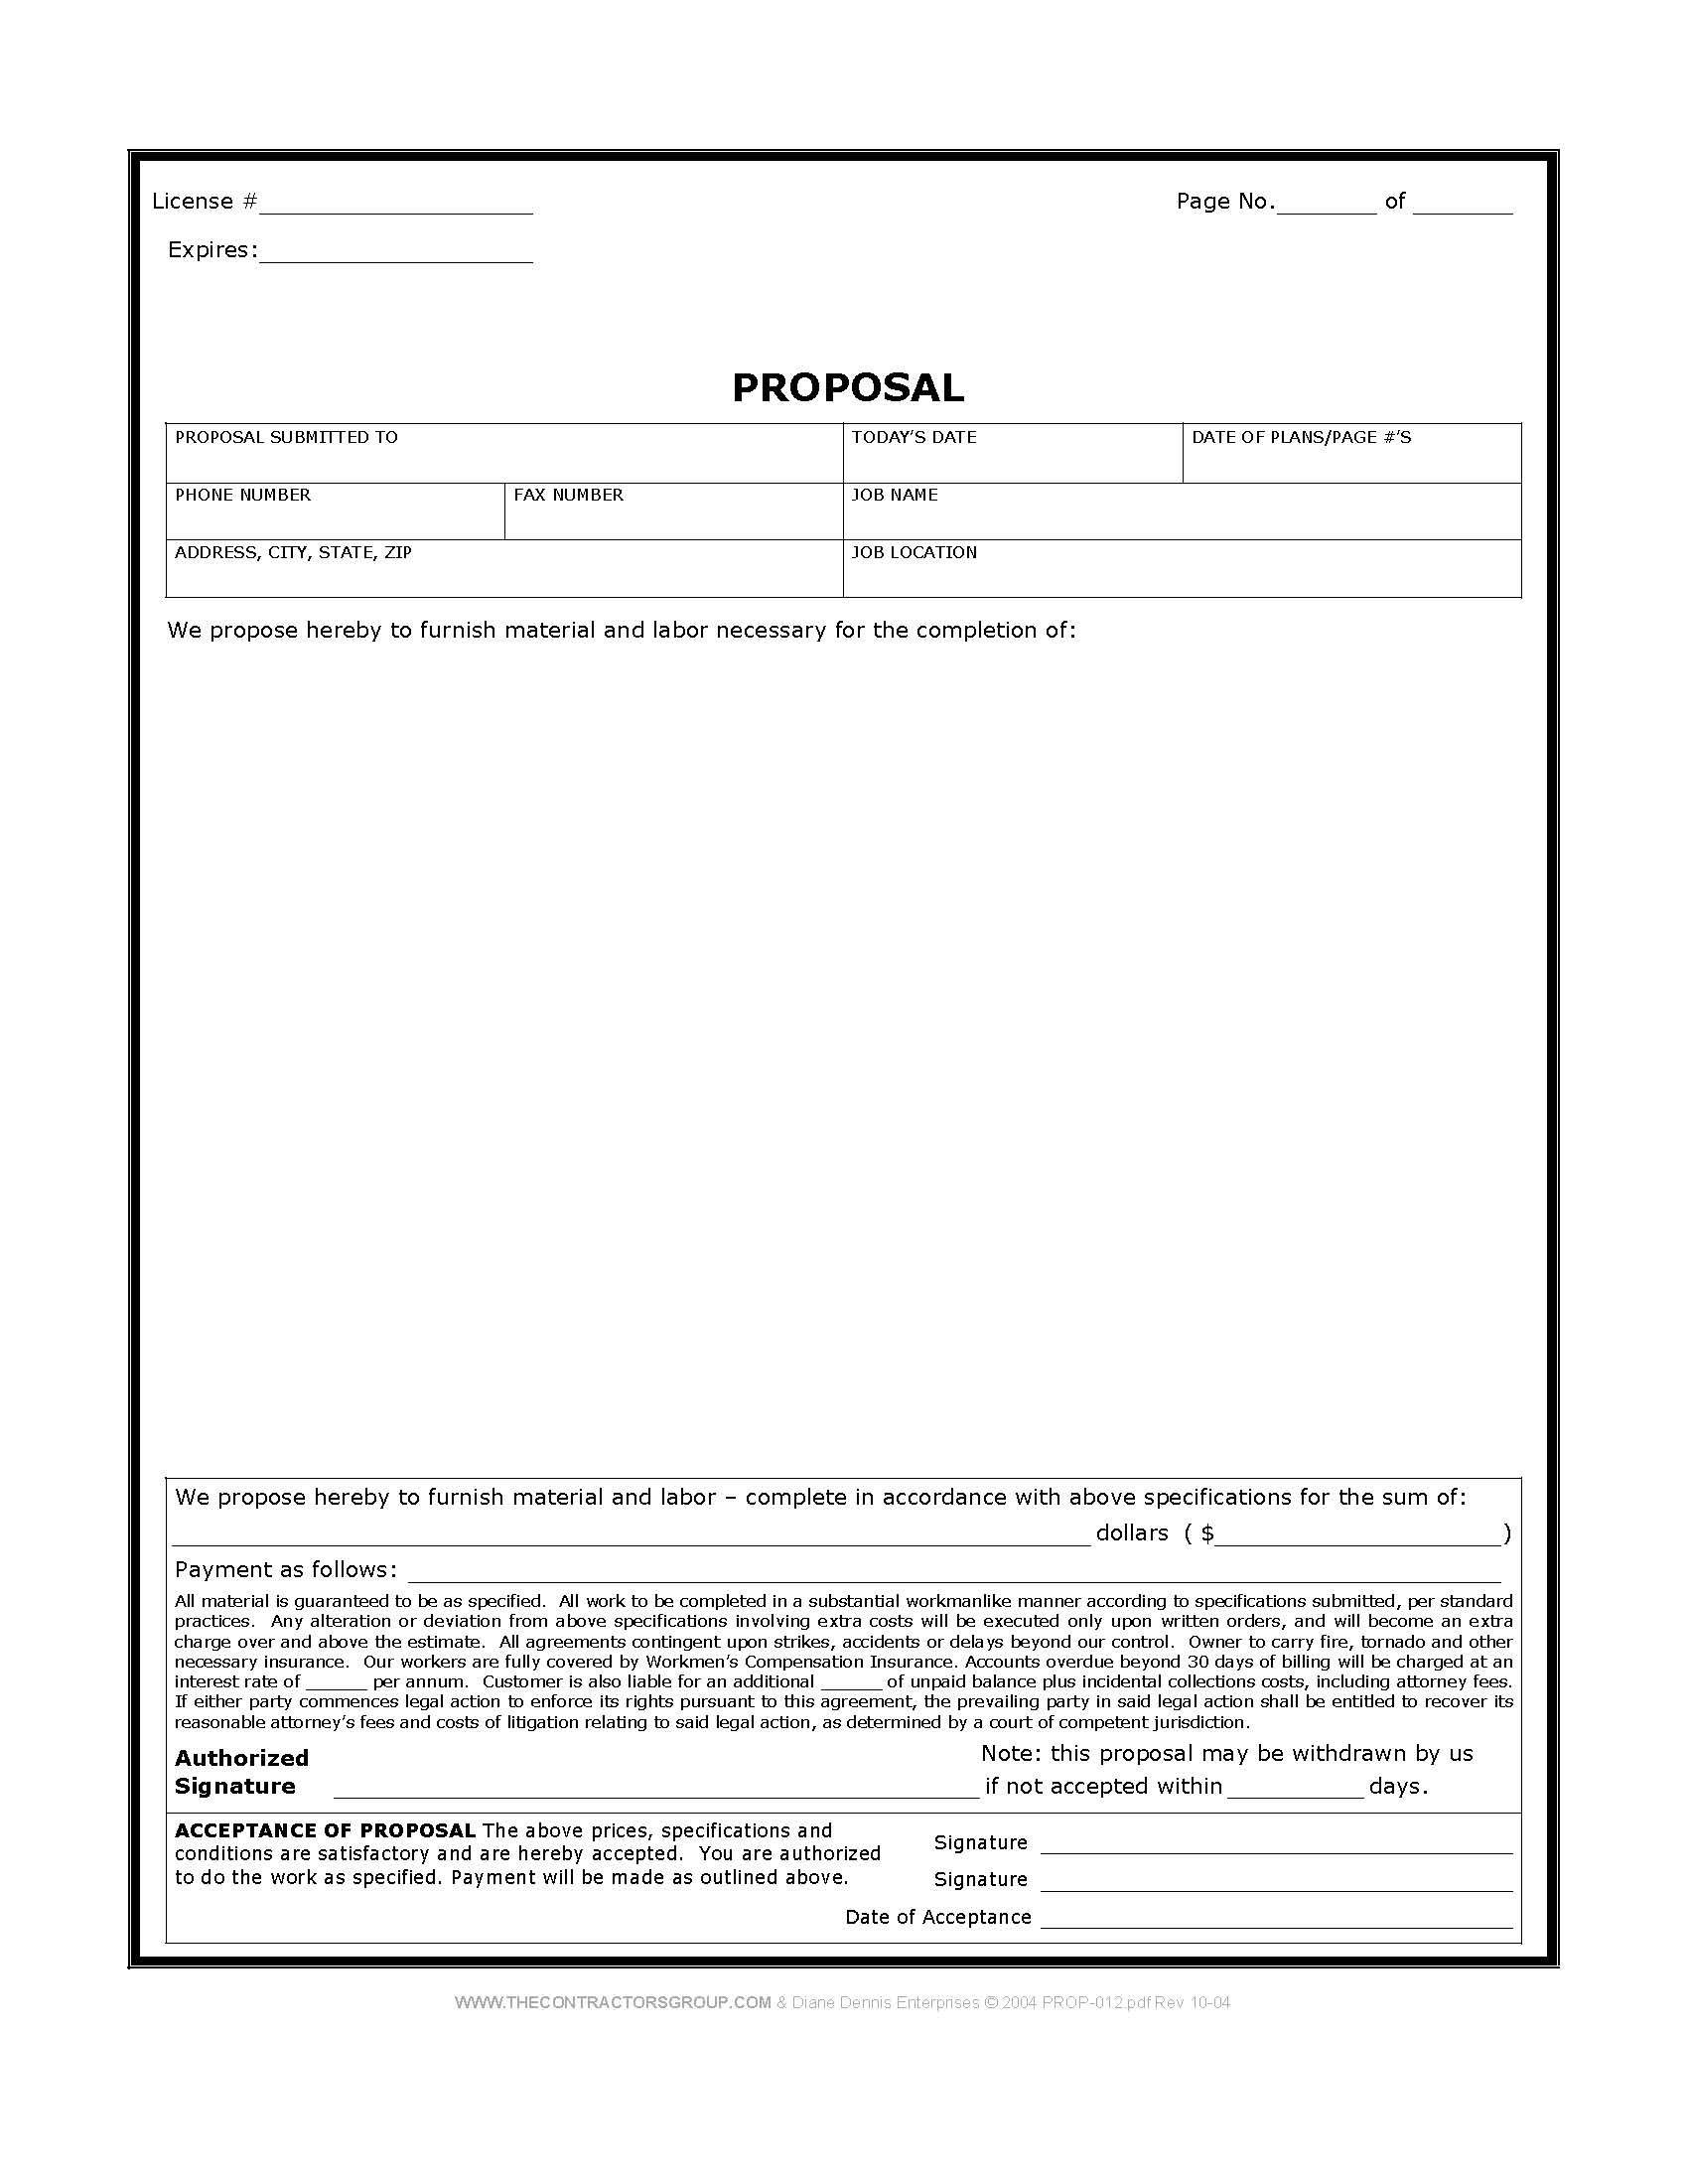 Free Print Contractor Proposal Forms | Construction Proposal Form - Find Free Printable Forms Online